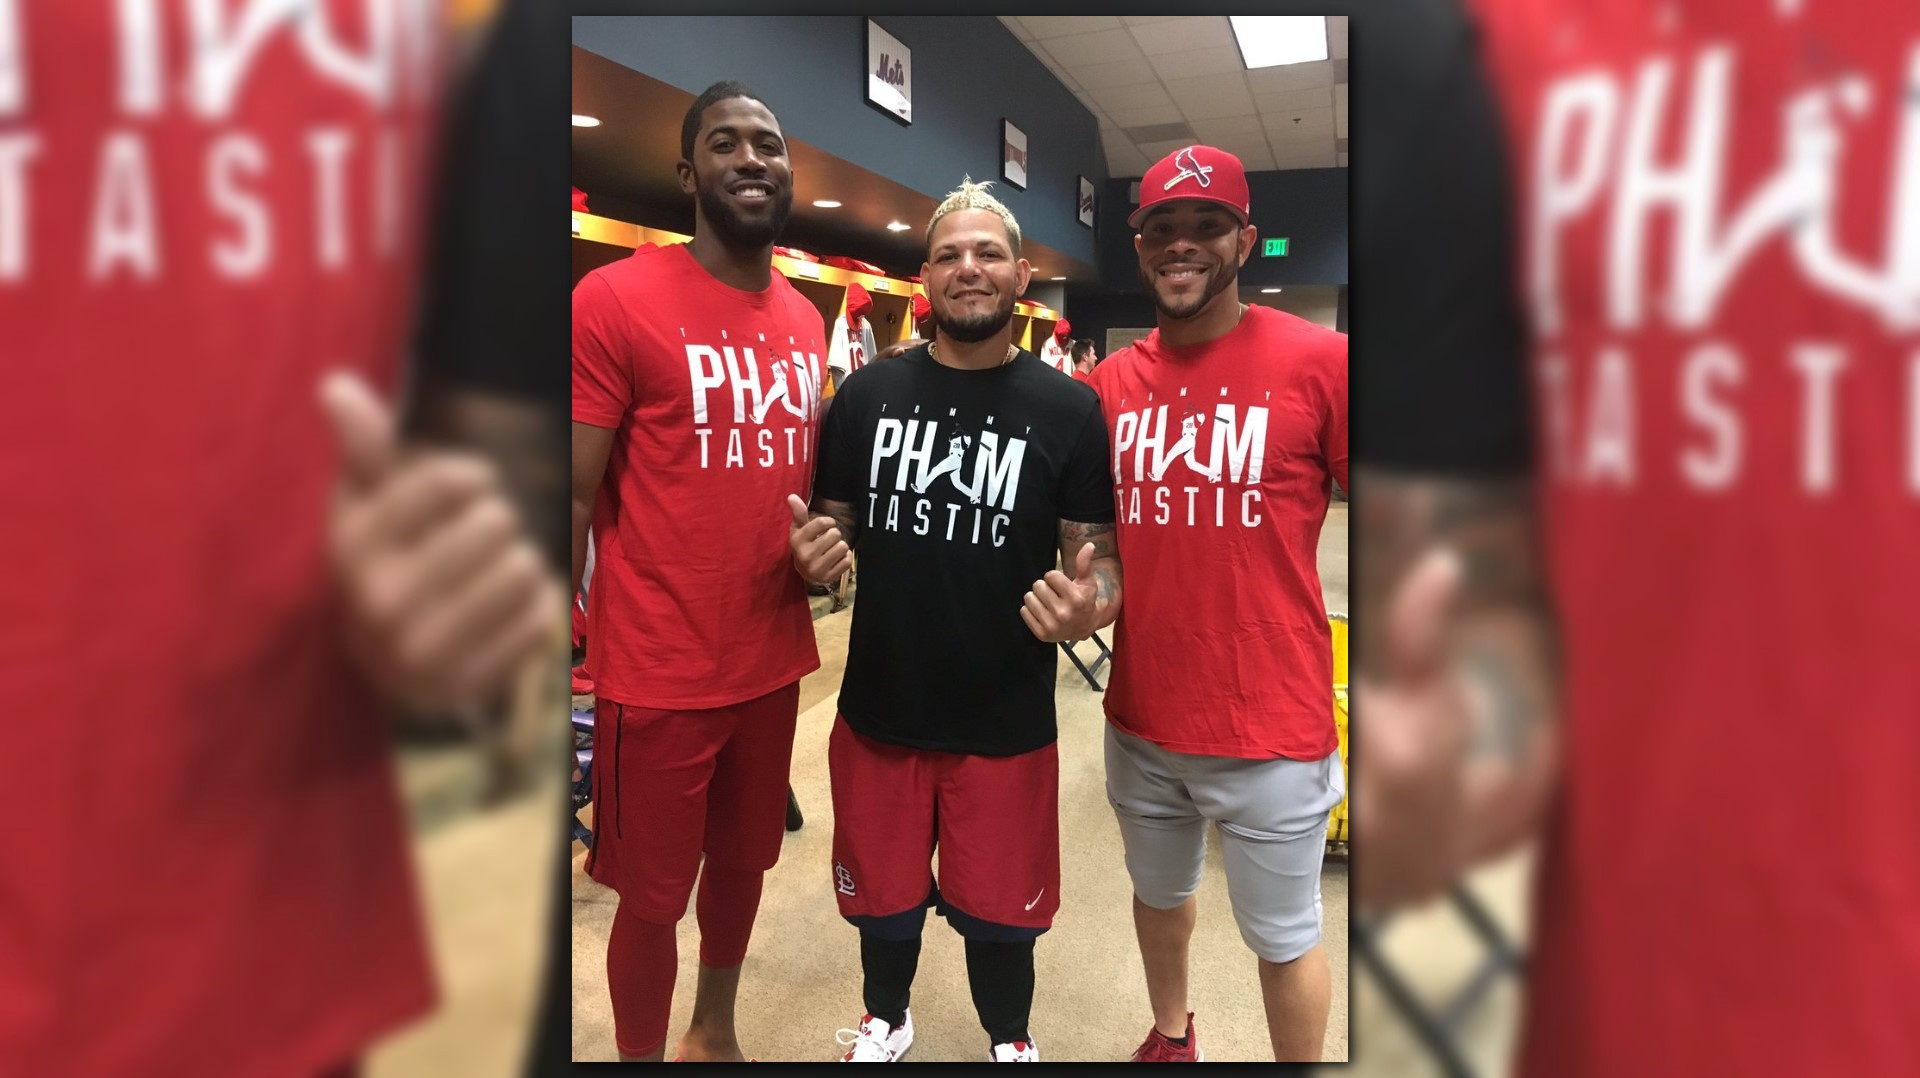 Tommy Pham on X: Had a surprise visitor down here in the 🇩🇴  #cardinalnation Waino!!! Glad I had the opportunity to play with him  because I truly learned a lot on and